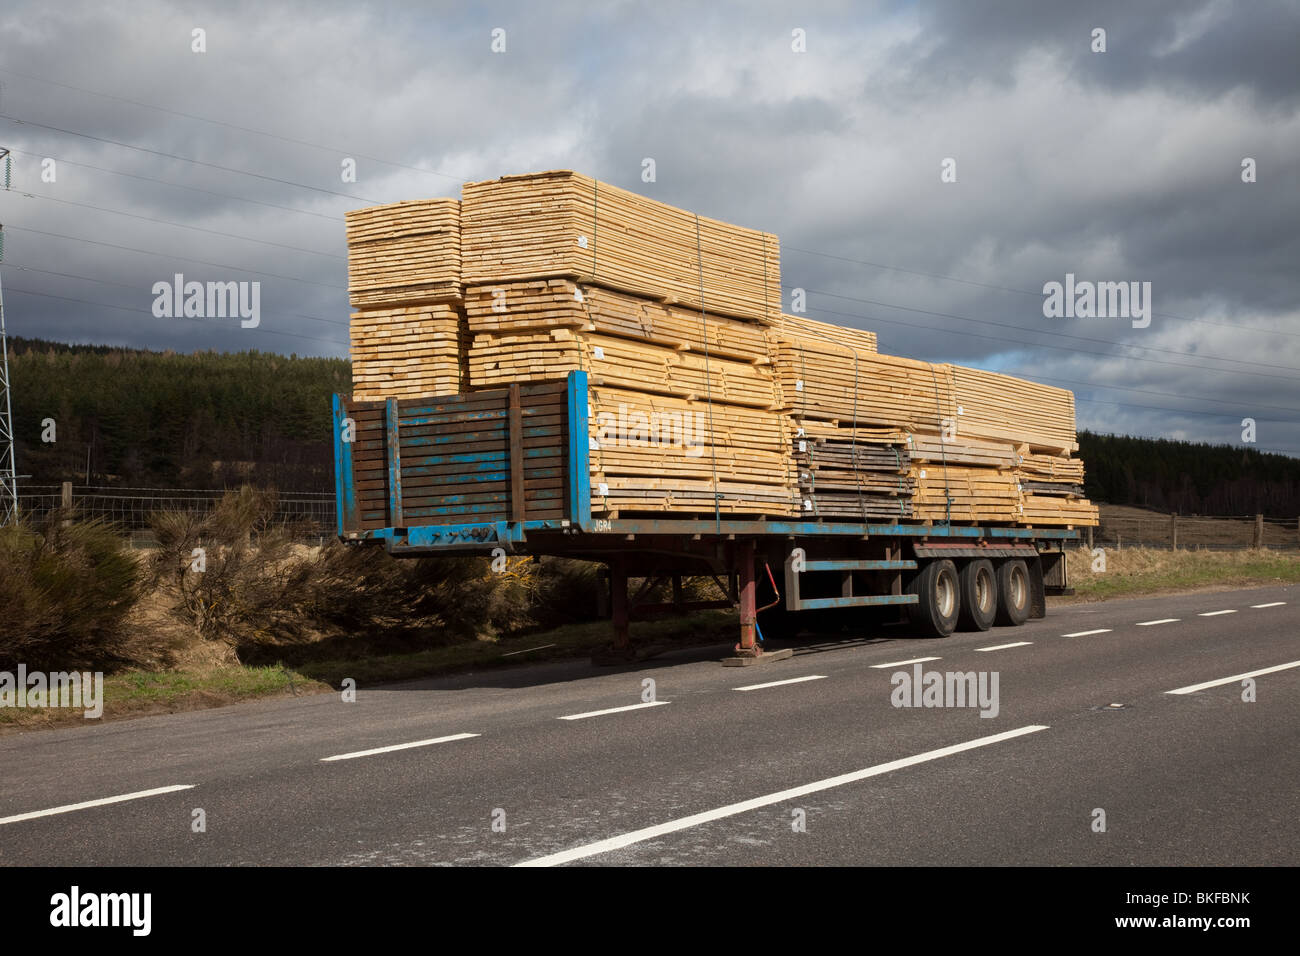 Parked Truck, Lorry Trailer in lay-by stacked with machined planks of Timber, Aviemore, Scotland, UK Stock Photo